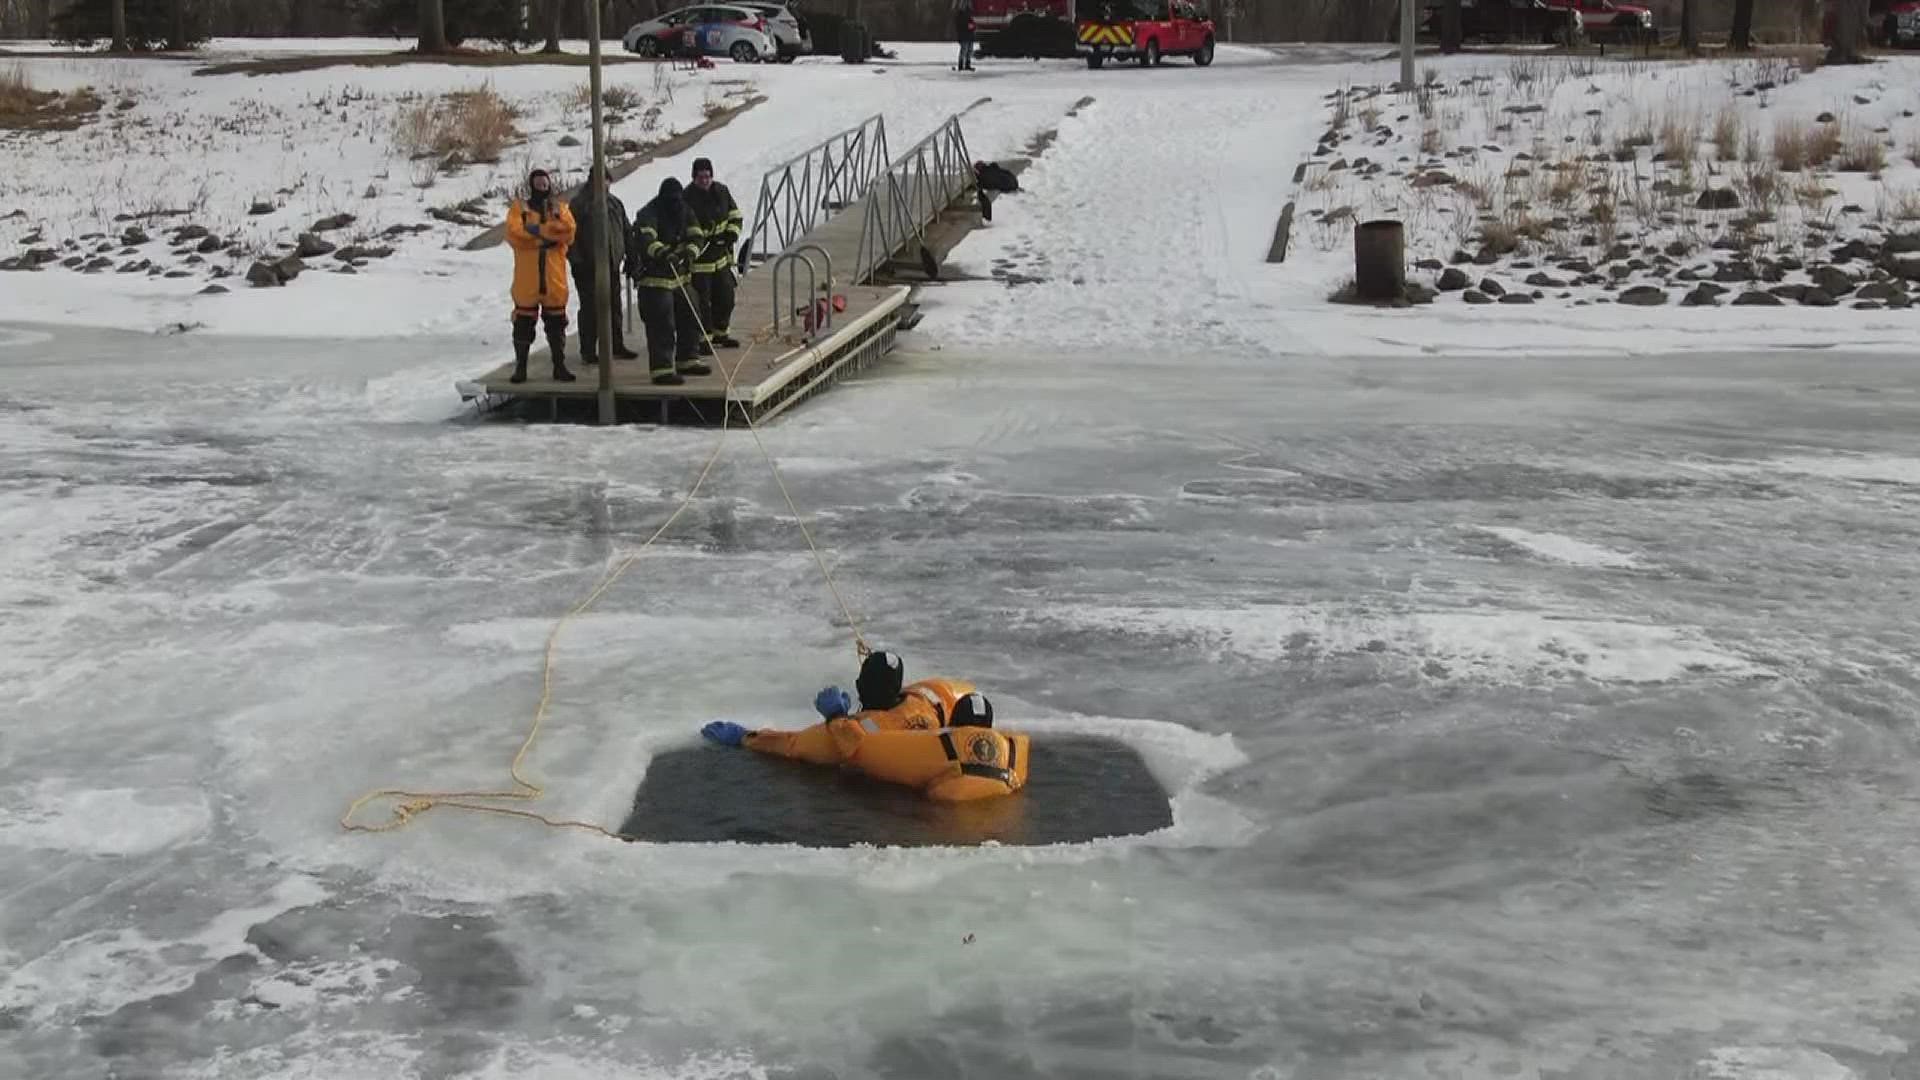 15 fire fighters took the plunge into the freezing waters to practice pulling someone out in the case of an accident